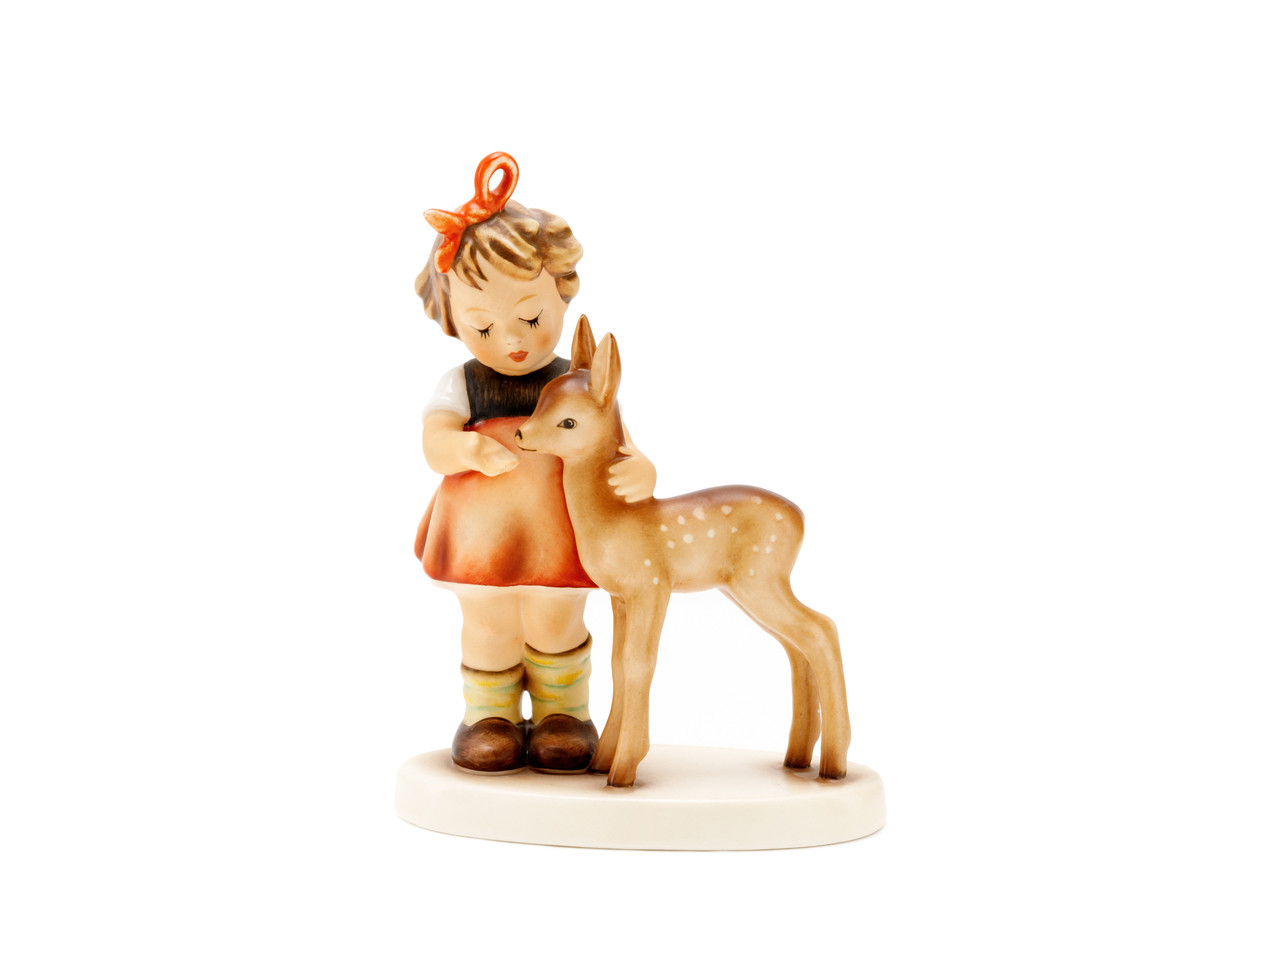  Hummel Figurine 479 I Brought You a Gift: Home Decor Products:  Home & Kitchen